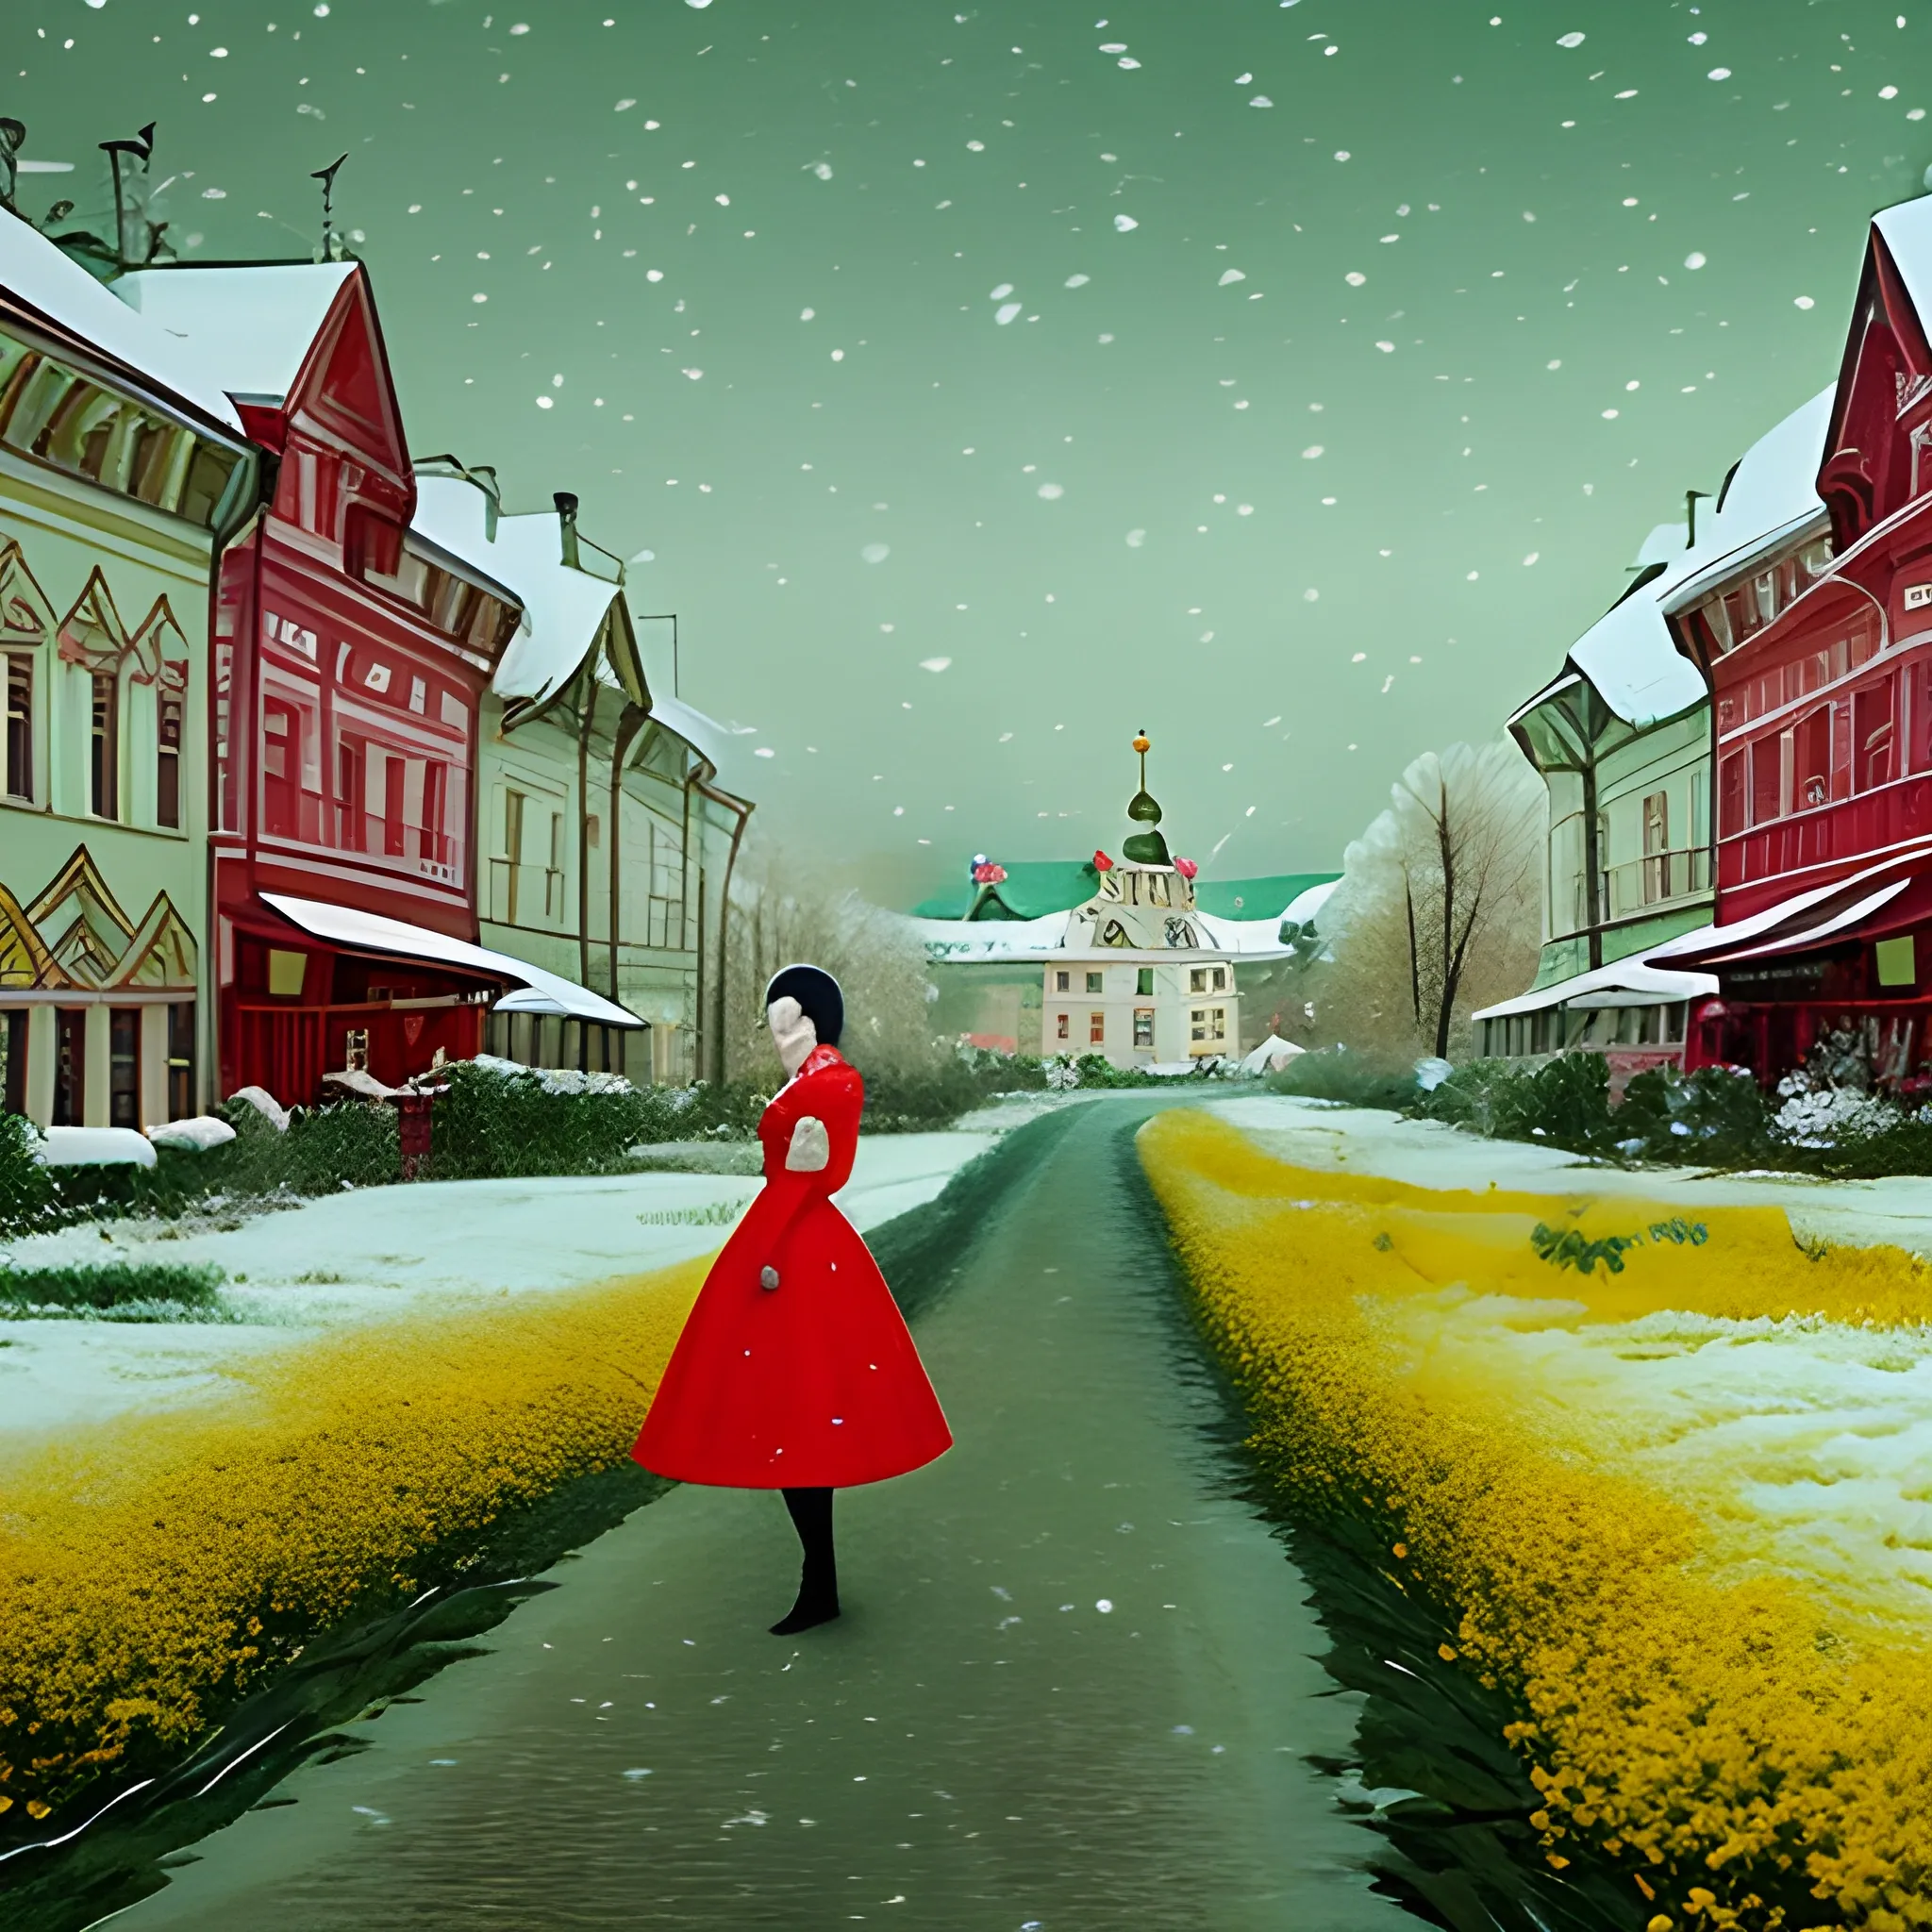 Russian landscape snowing, black-haired woman in the middle of the landscape holding a furry white cat, wearing a light red dress, old Russian-style houses in the background and the green floor with yellow flowers shows, Trippy